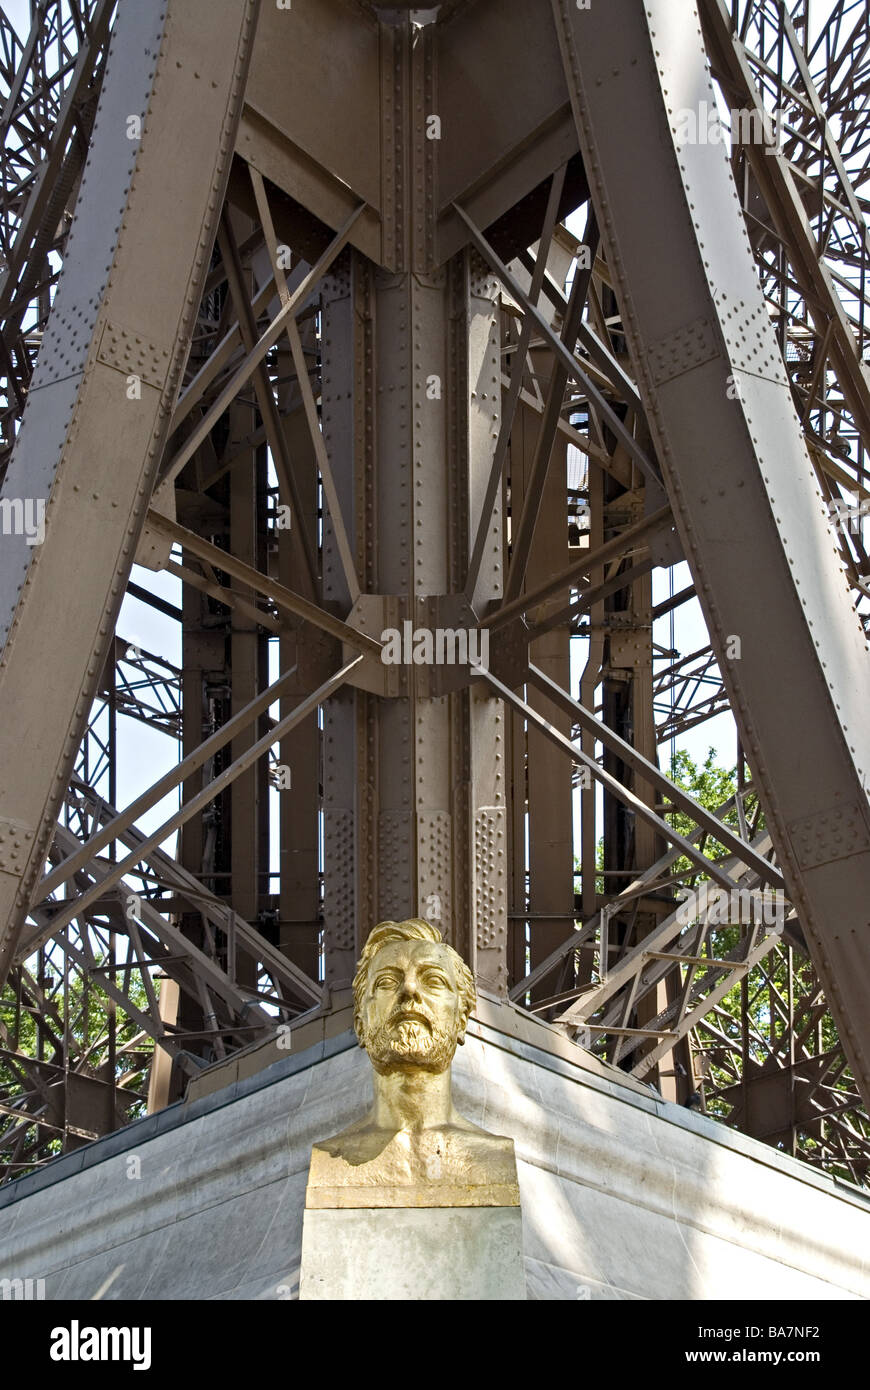 France Paris Eiffelturm bust Gustave Eiffel no property release capital tower steel-timbering-tower construction construction Stock Photo